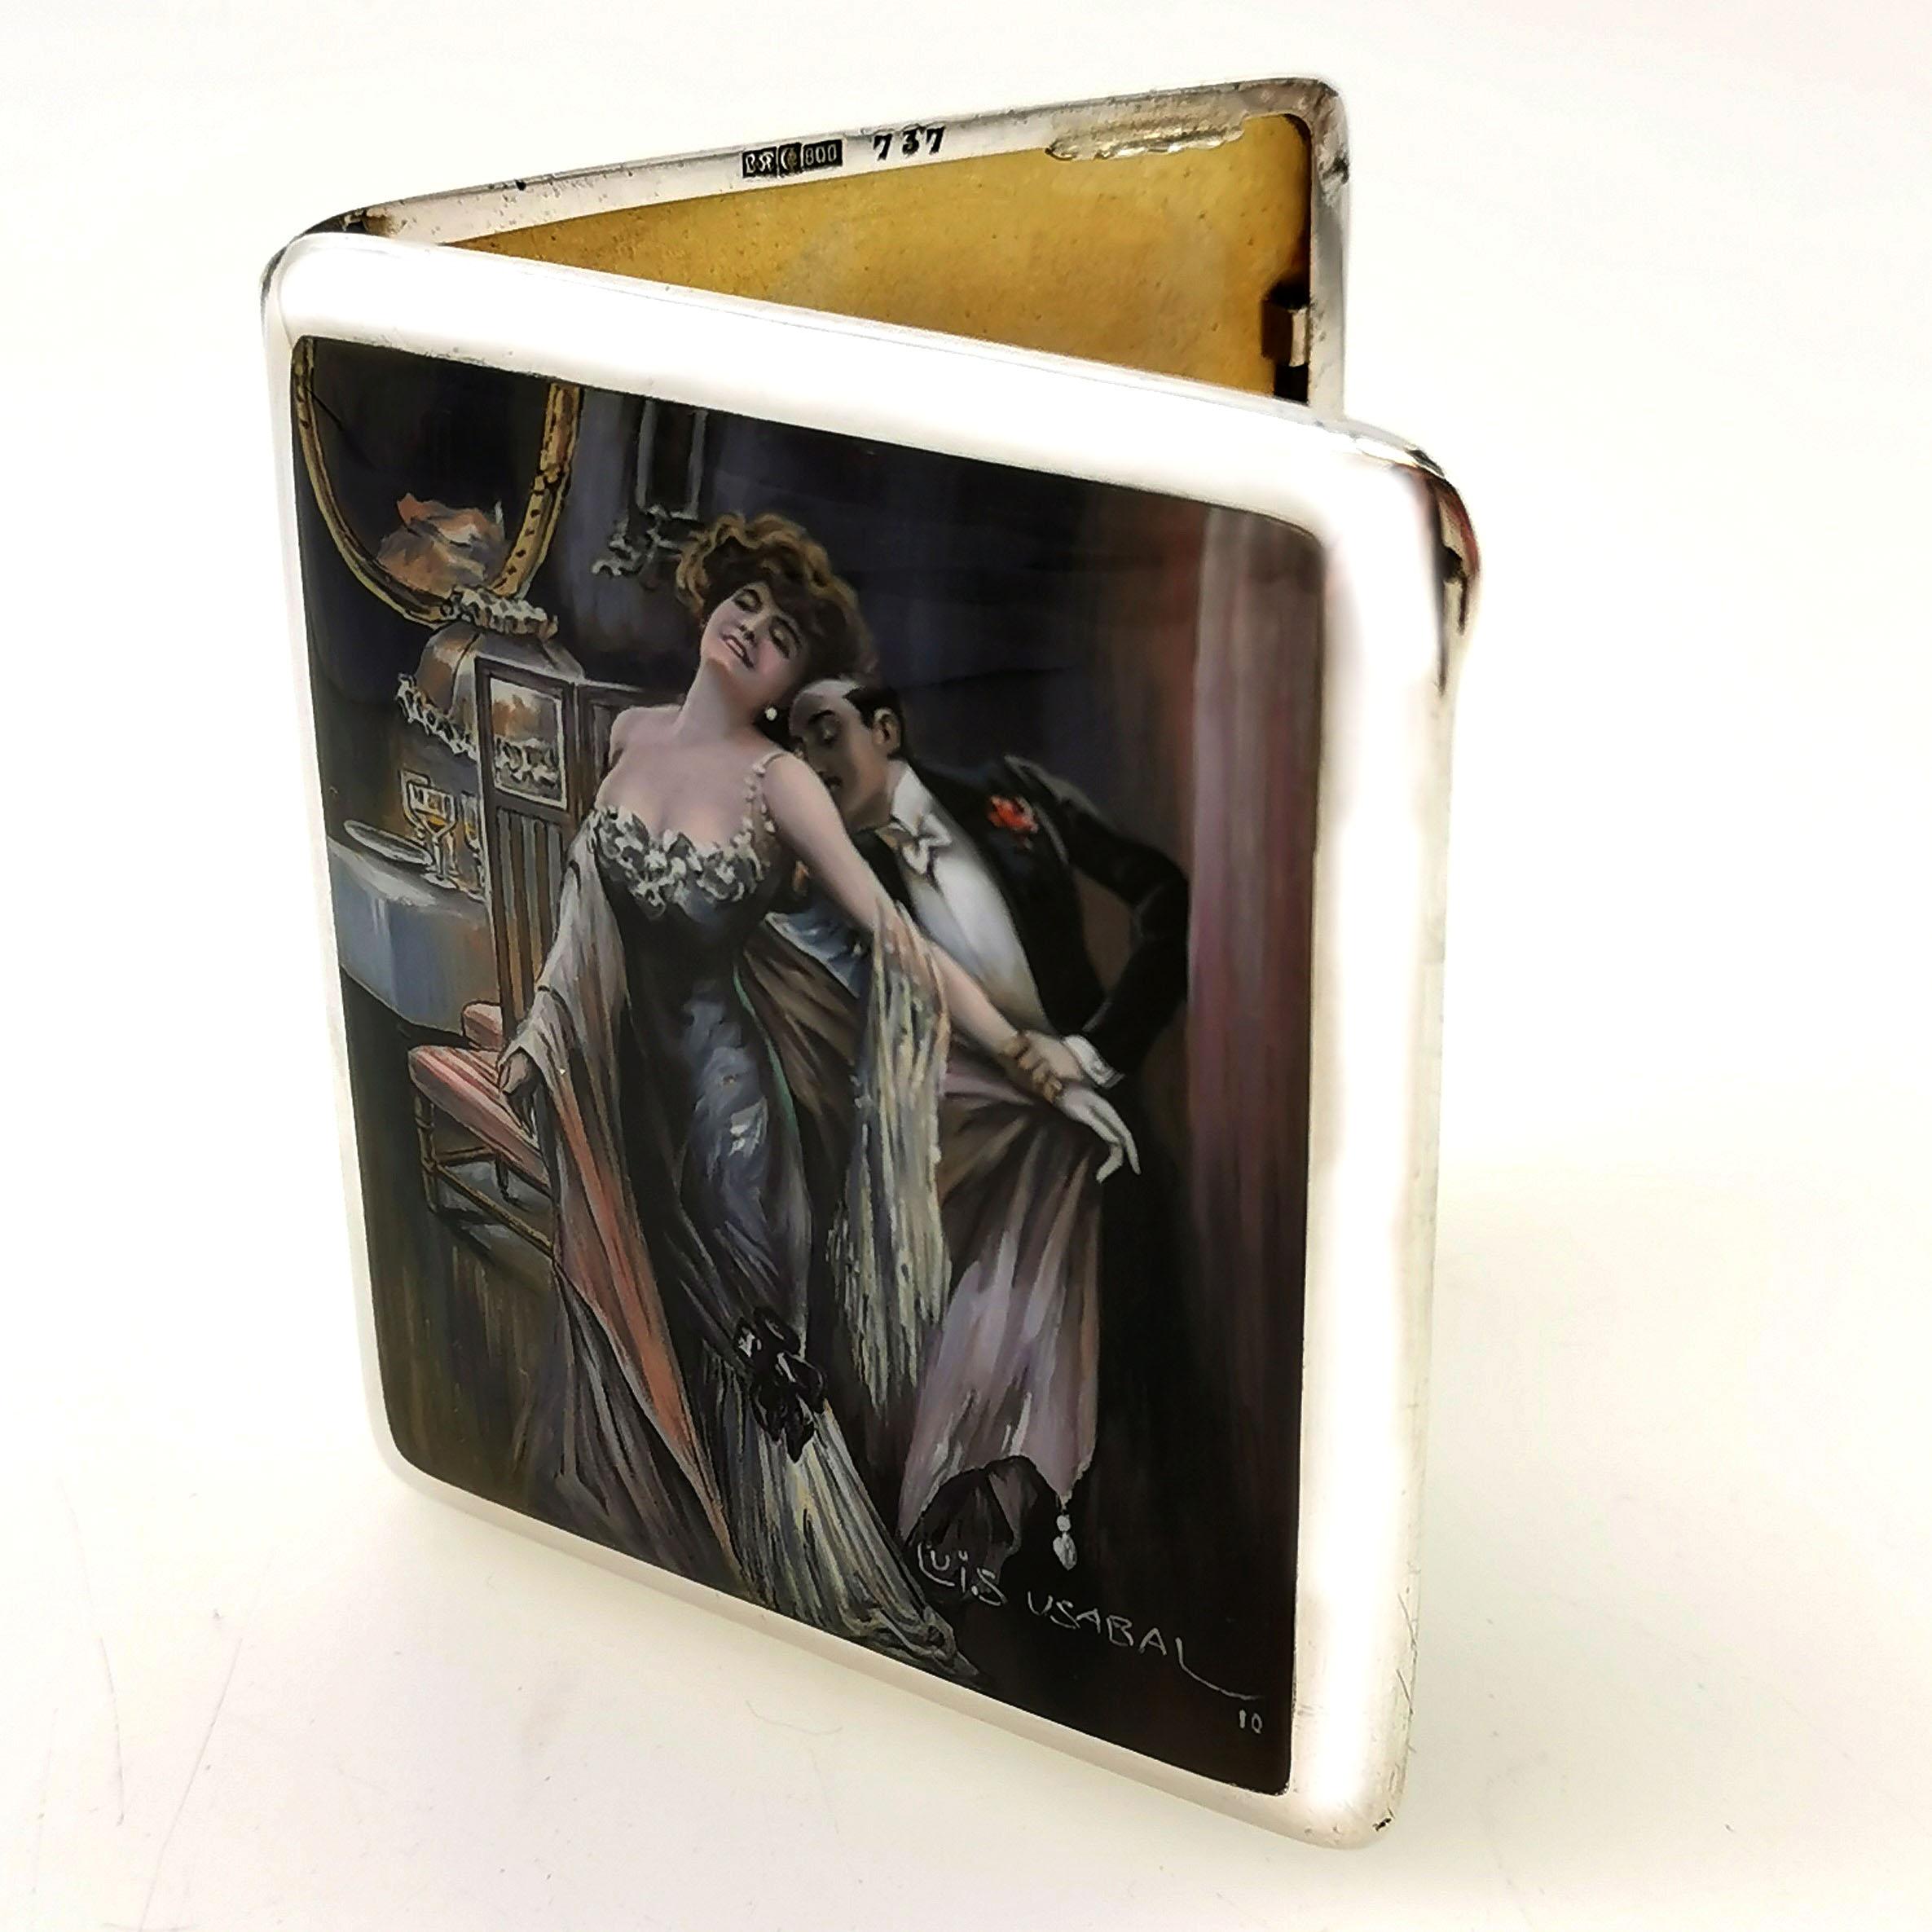 A magnificent Antique solid Silver Cigarette Case with a beautiful Enamelled cover signed by Luis Usabal. The image on the cover of the Case shows a couple in an embrace wearing evening wear in a detailed dining room setting. This image is created